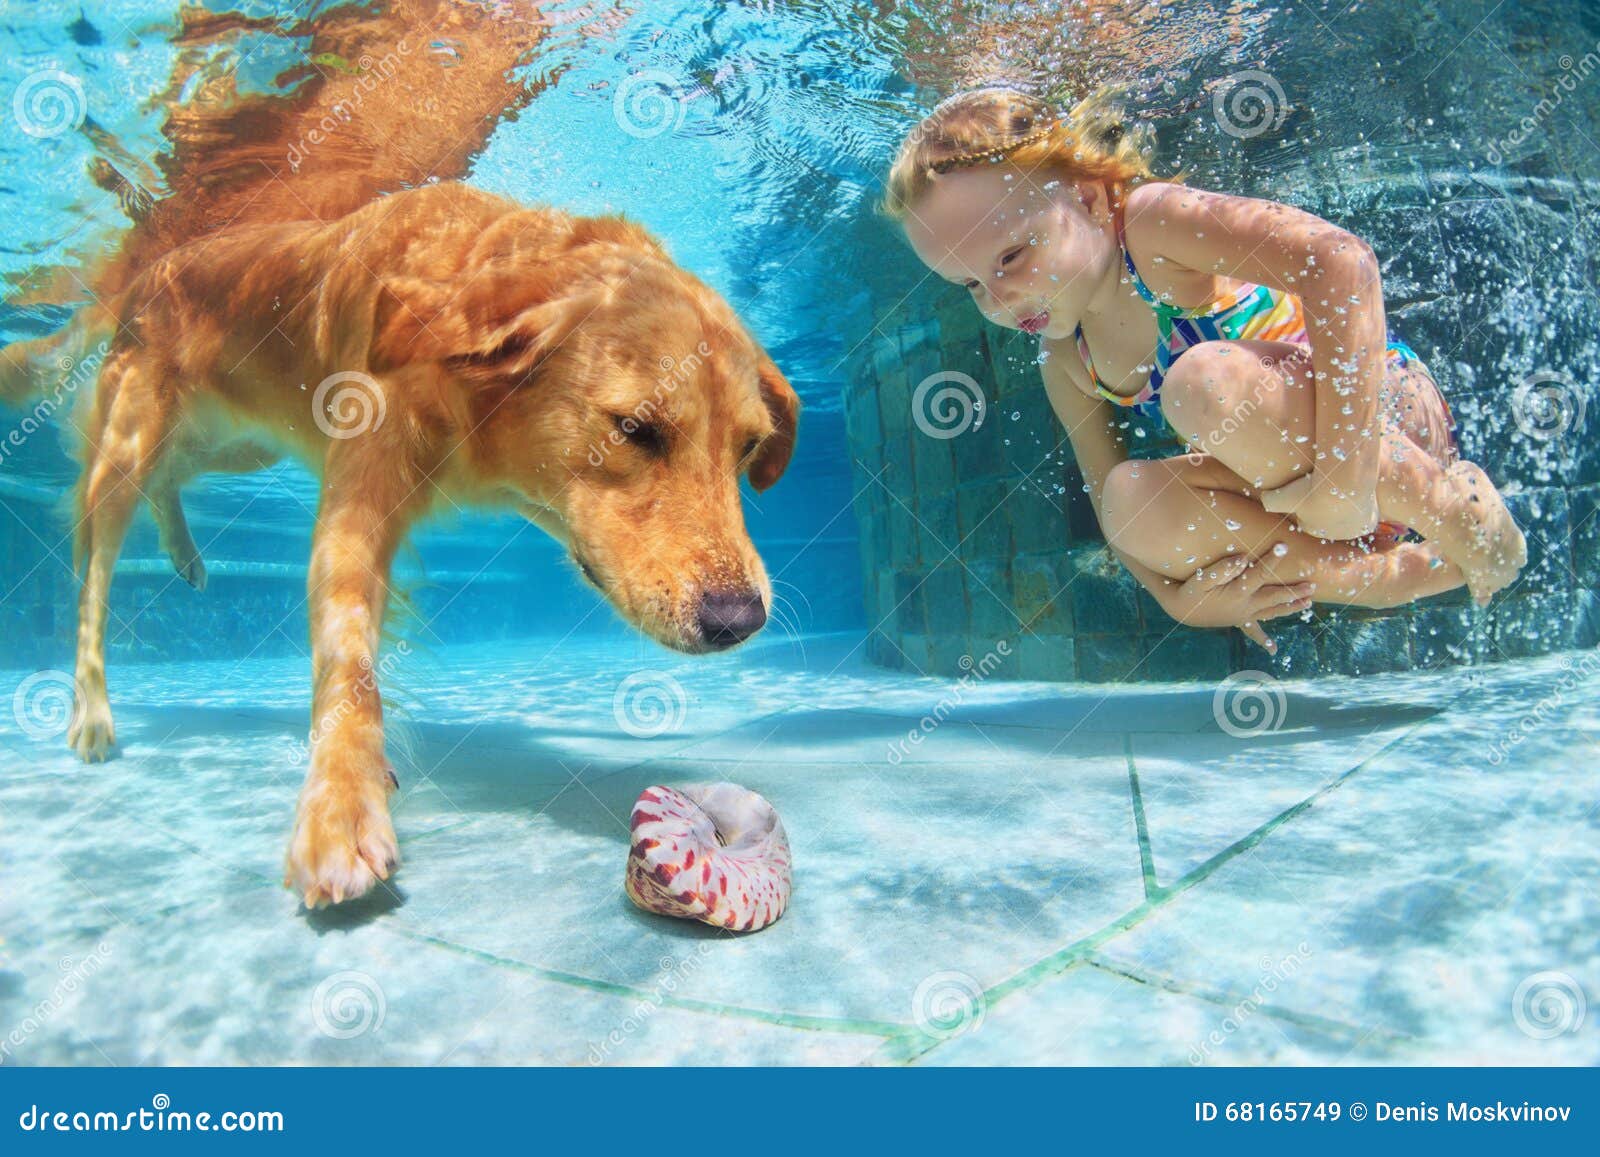 child with dog dive underwater in swimming pool